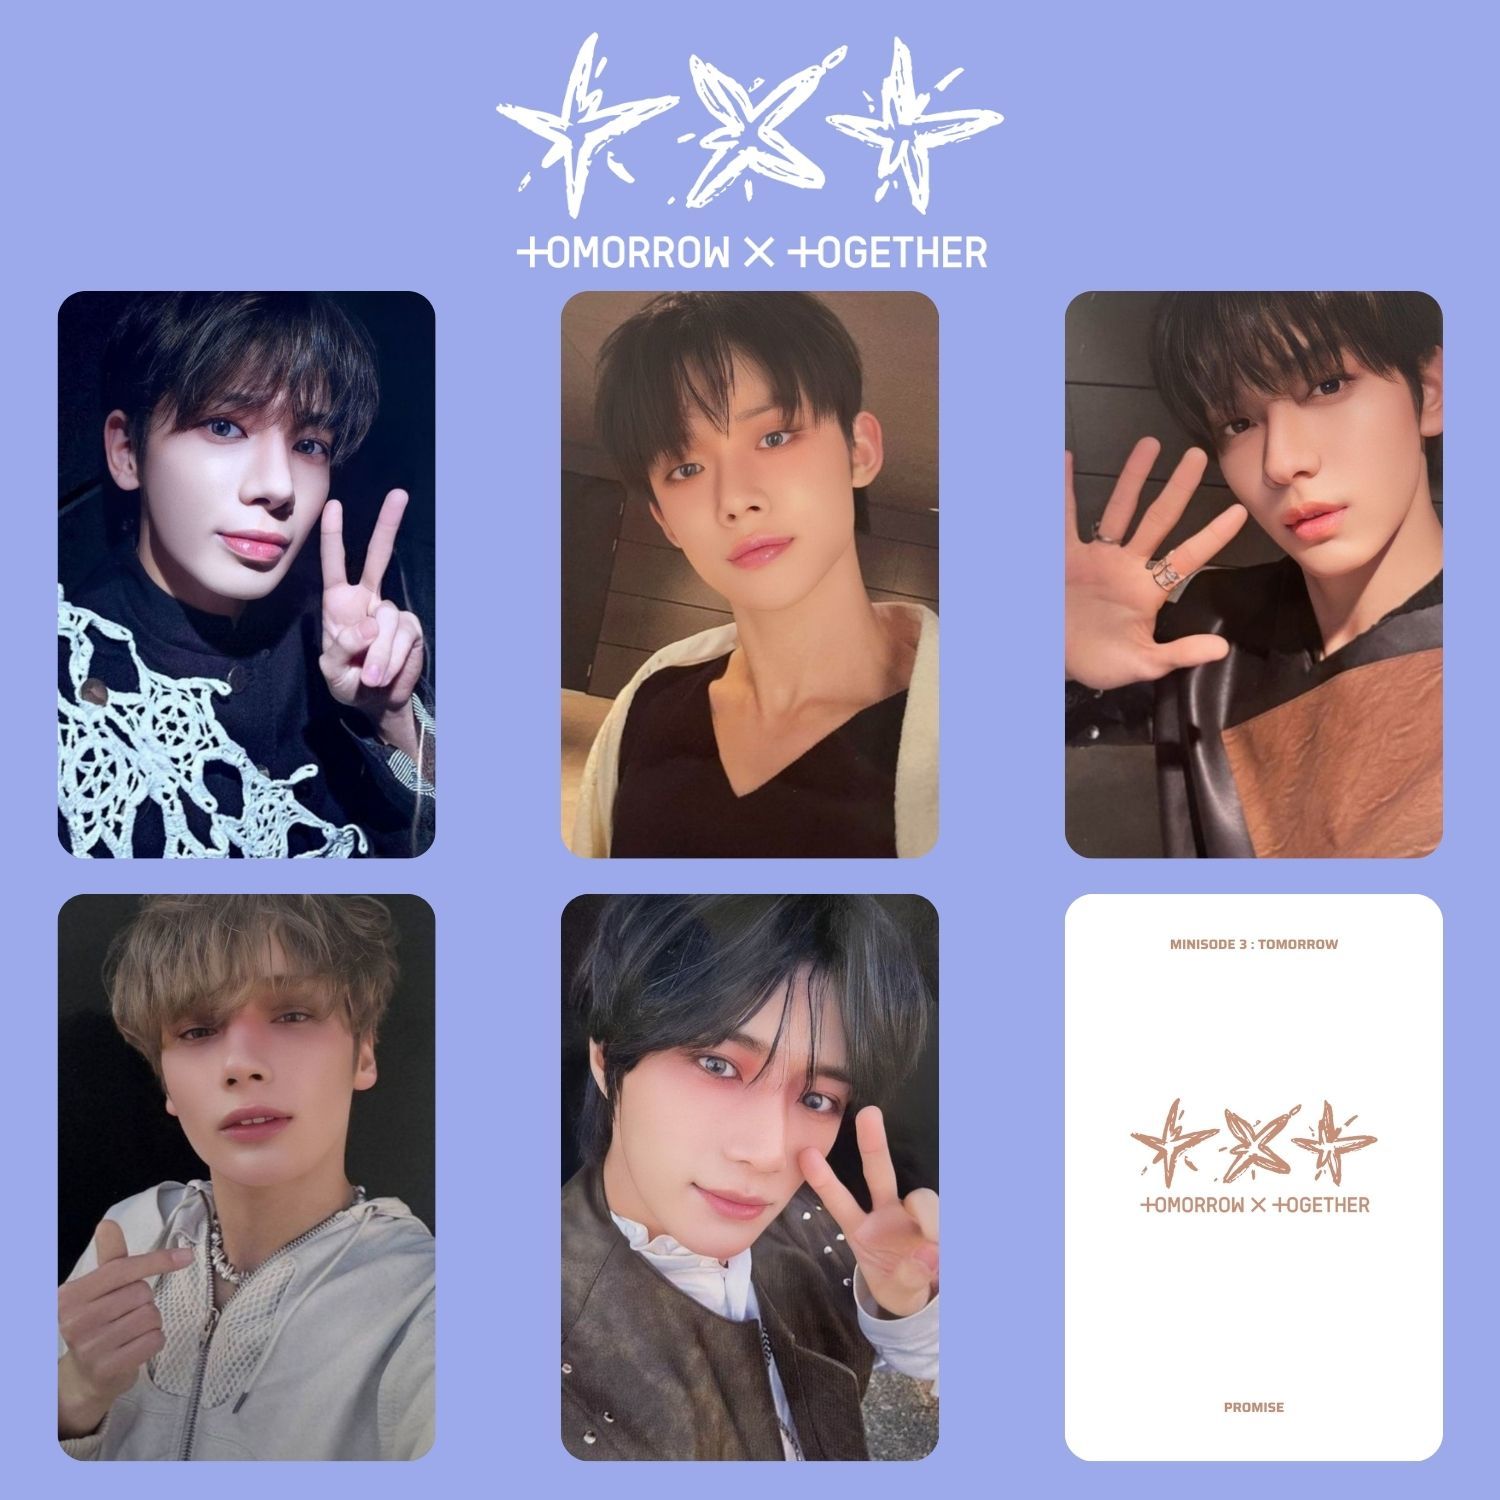 TXT '' Minisode 3 : Tomorrow '' Promise Ver. Photocards Set